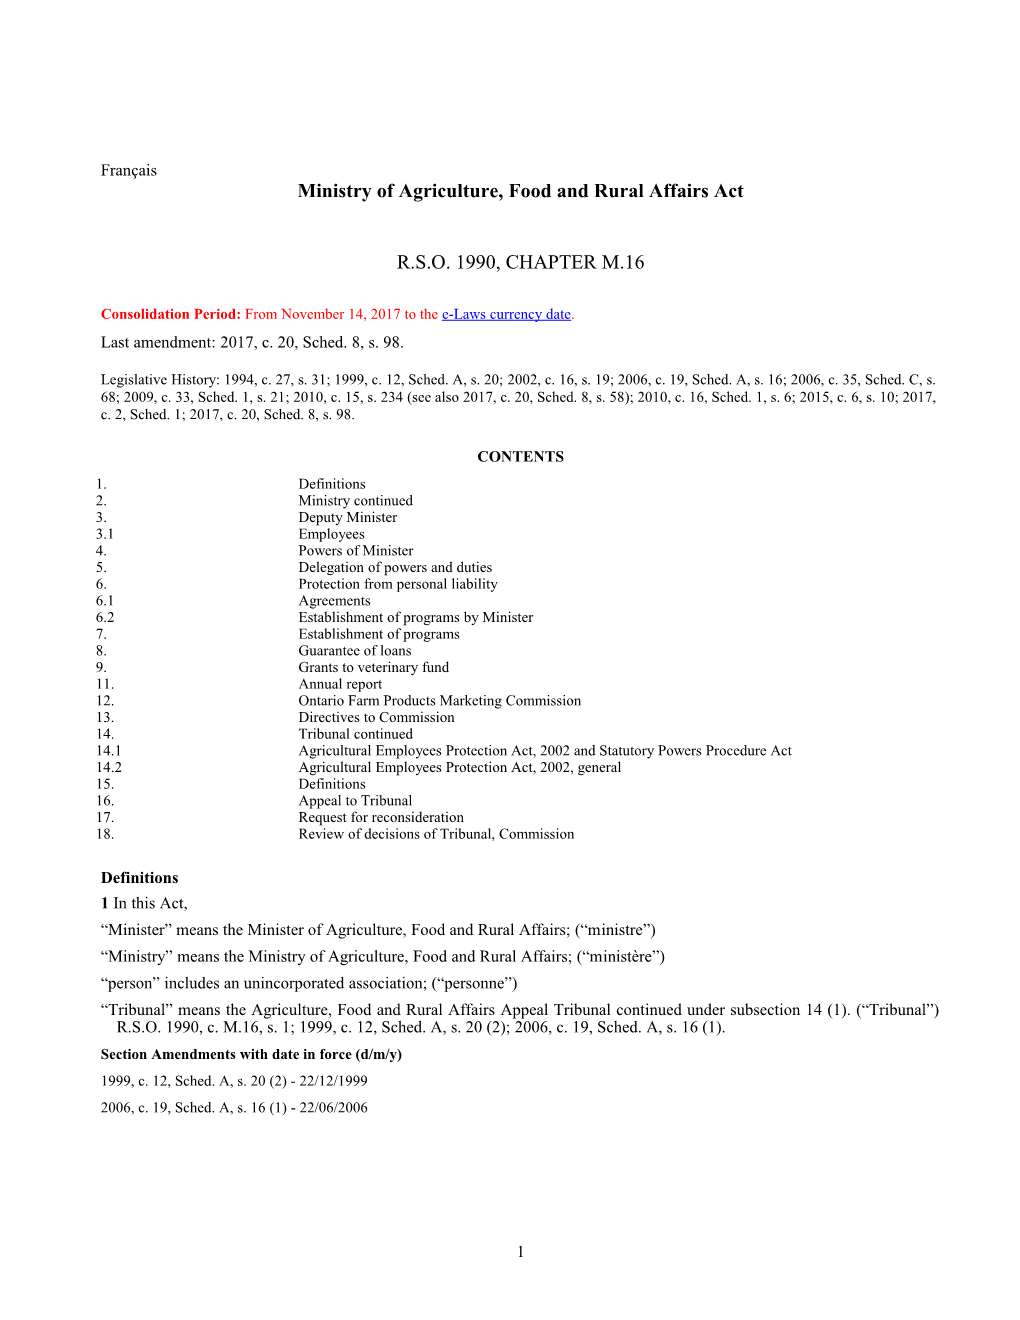 Ministry of Agriculture, Food and Rural Affairs Act, R.S.O. 1990, C. M.16